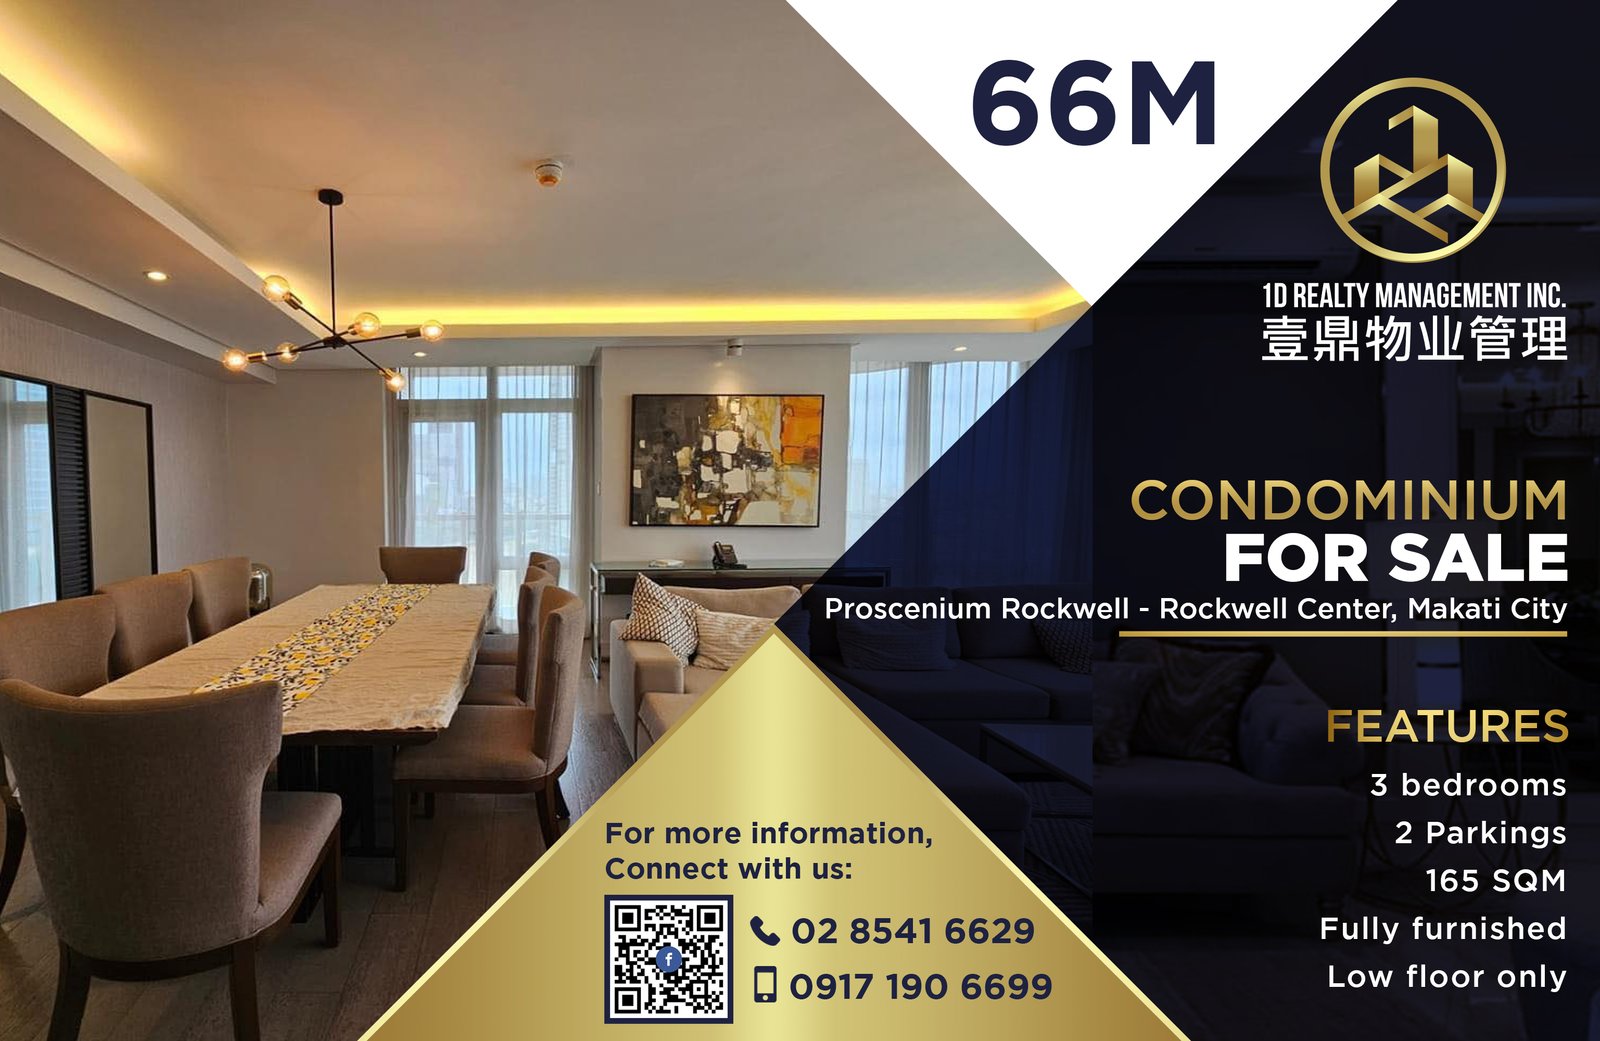 FOR SALE 3BR - The Proscenium Rockwell -  Rockwell Center, Makati City